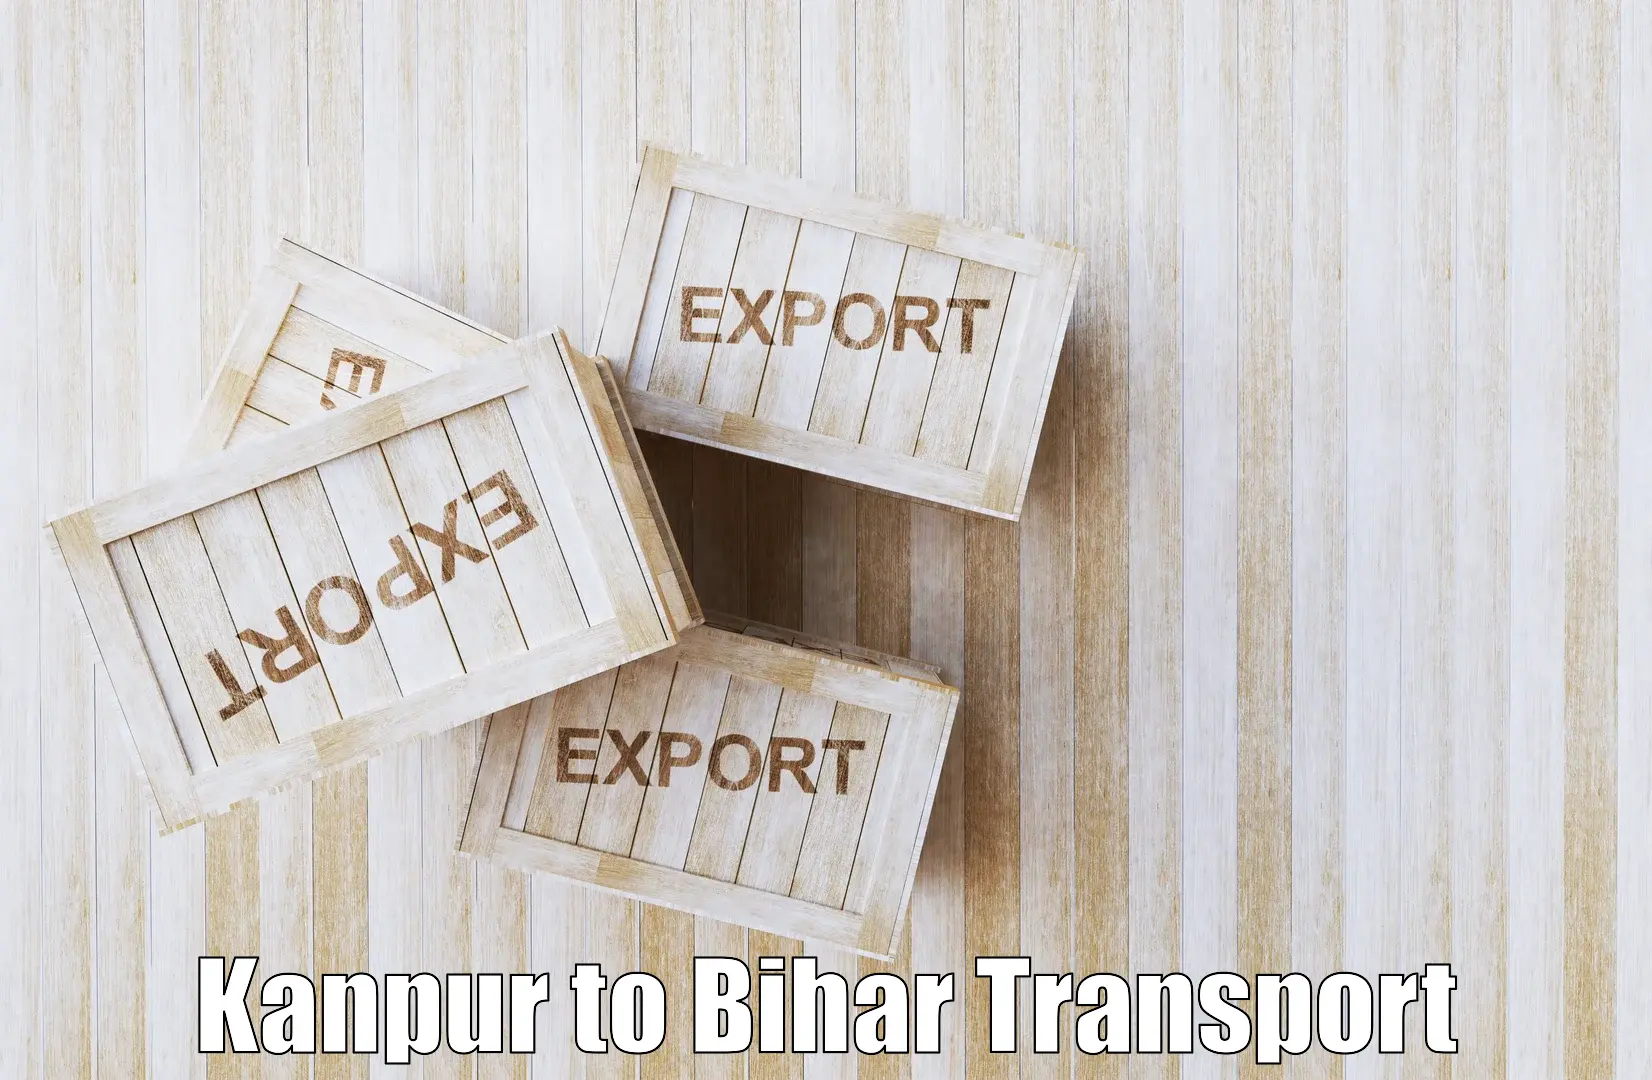 Container transport service in Kanpur to Kaluahi